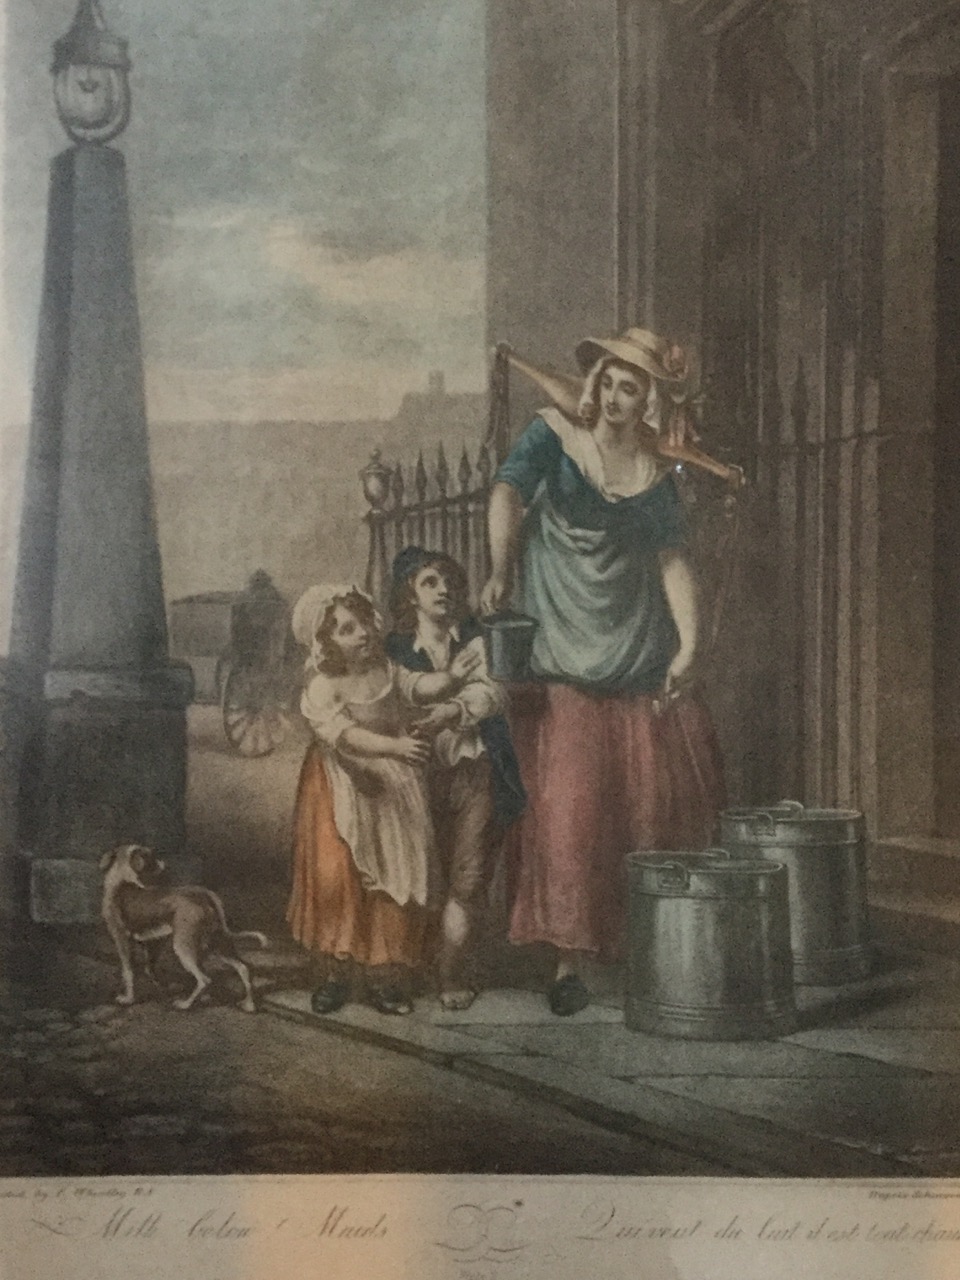 Two Cries of London prints after Wheatly, Milk below Maids and Do you want any Matches, mounted - Image 4 of 6